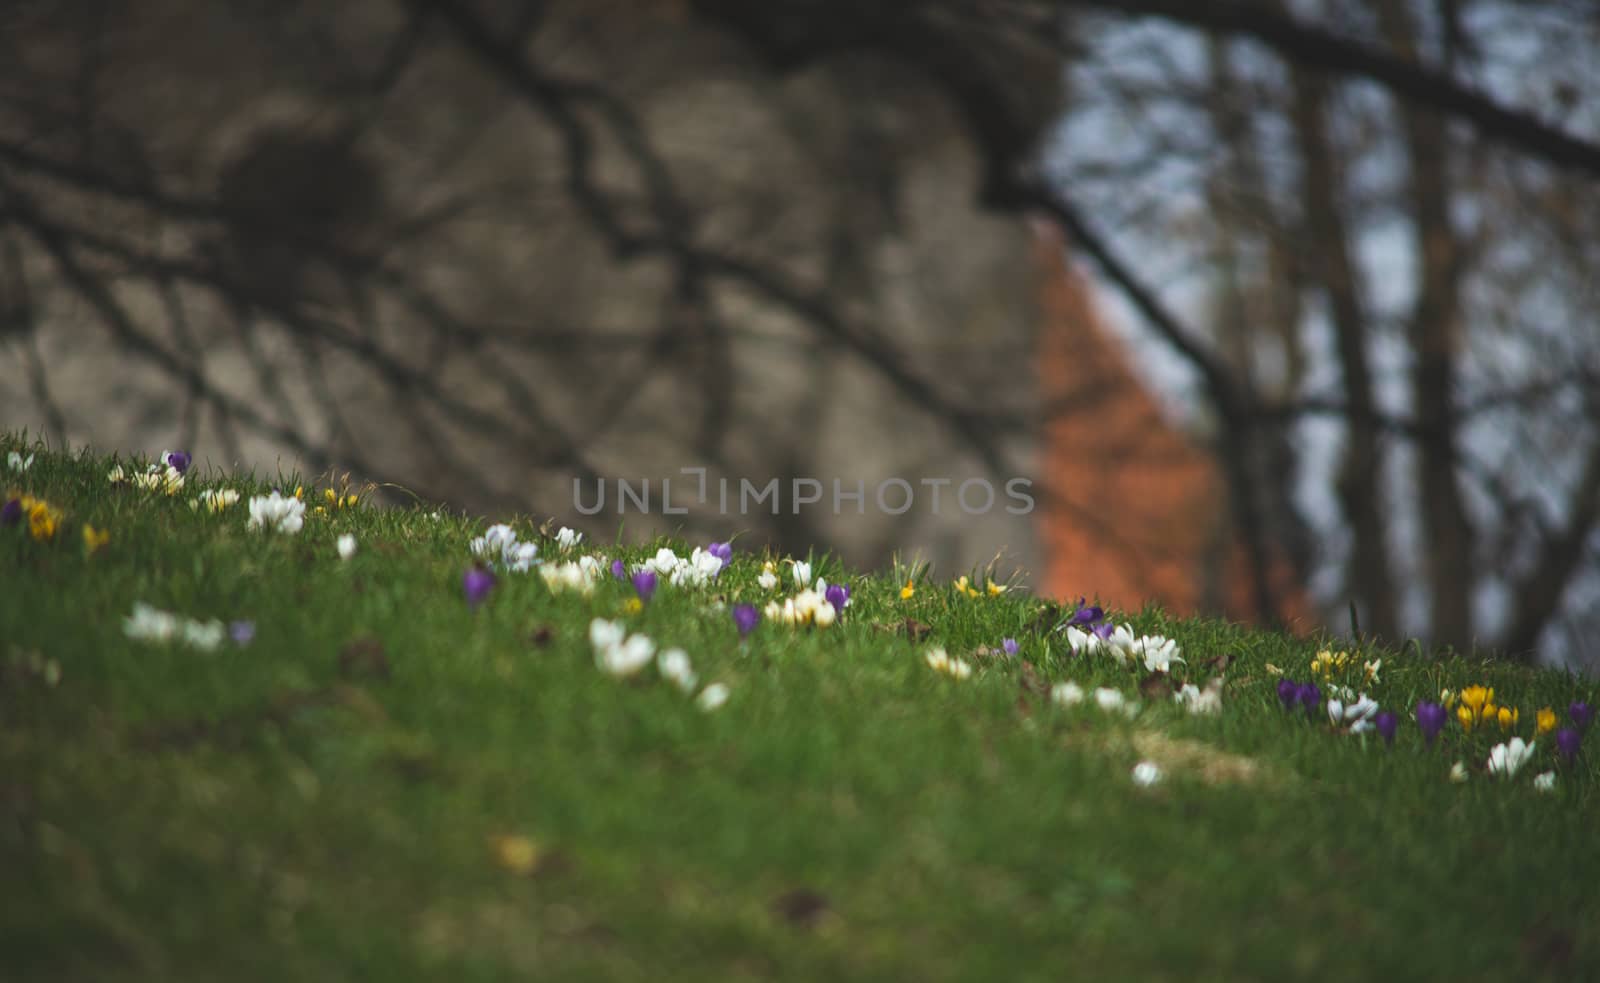 Multicolored spring flowers on a green lawn, shot with a shallow depth of field